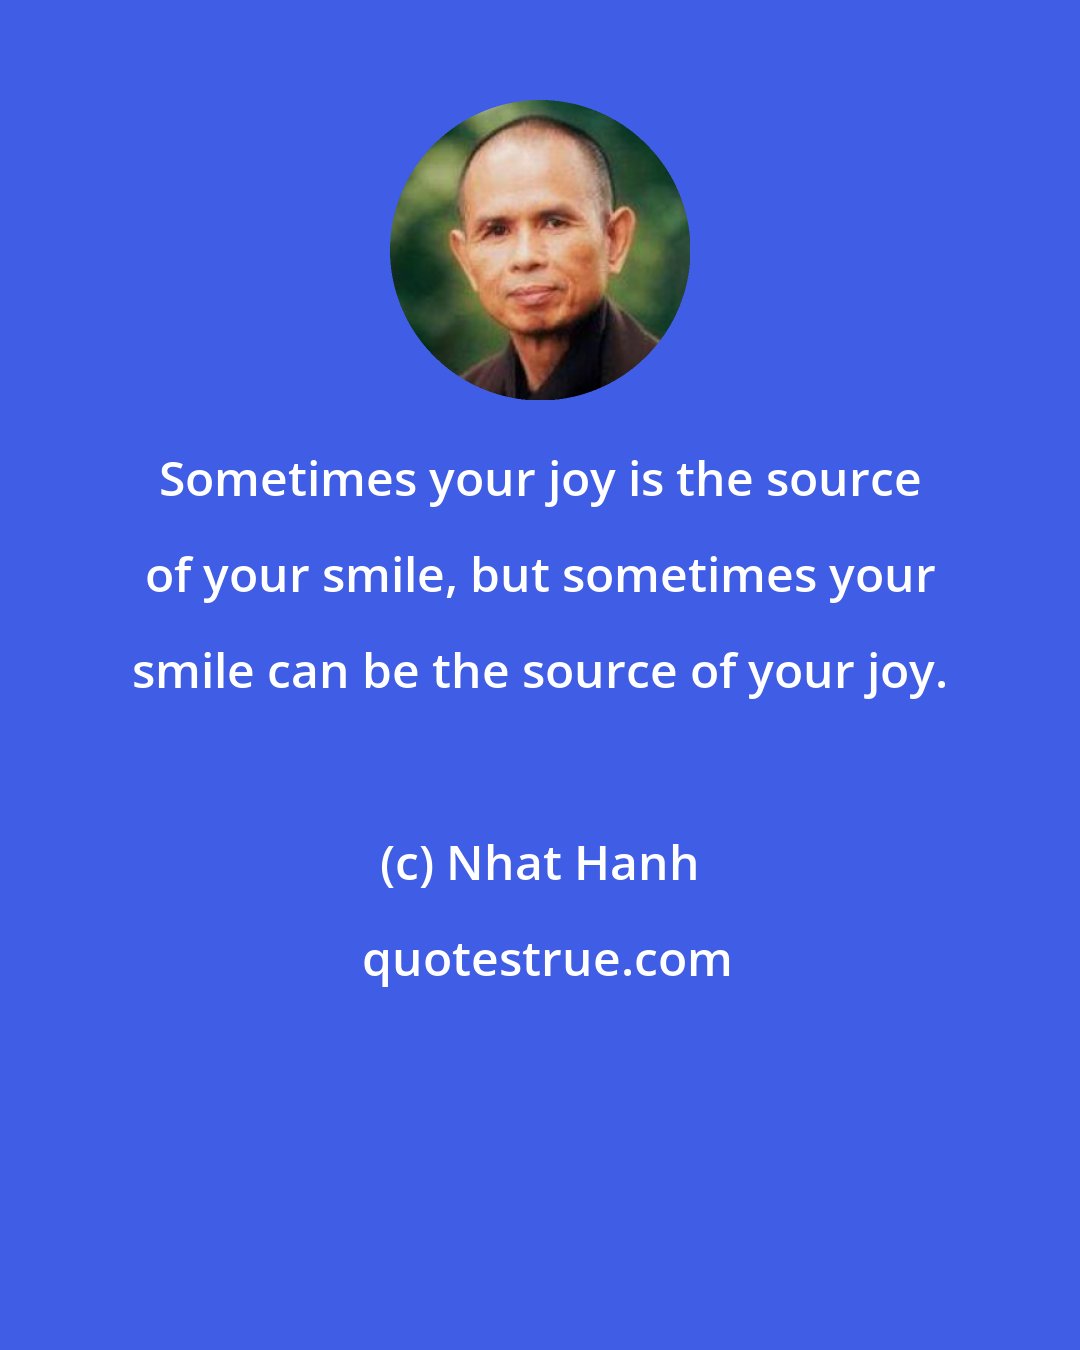 Nhat Hanh: Sometimes your joy is the source of your smile, but sometimes your smile can be the source of your joy.